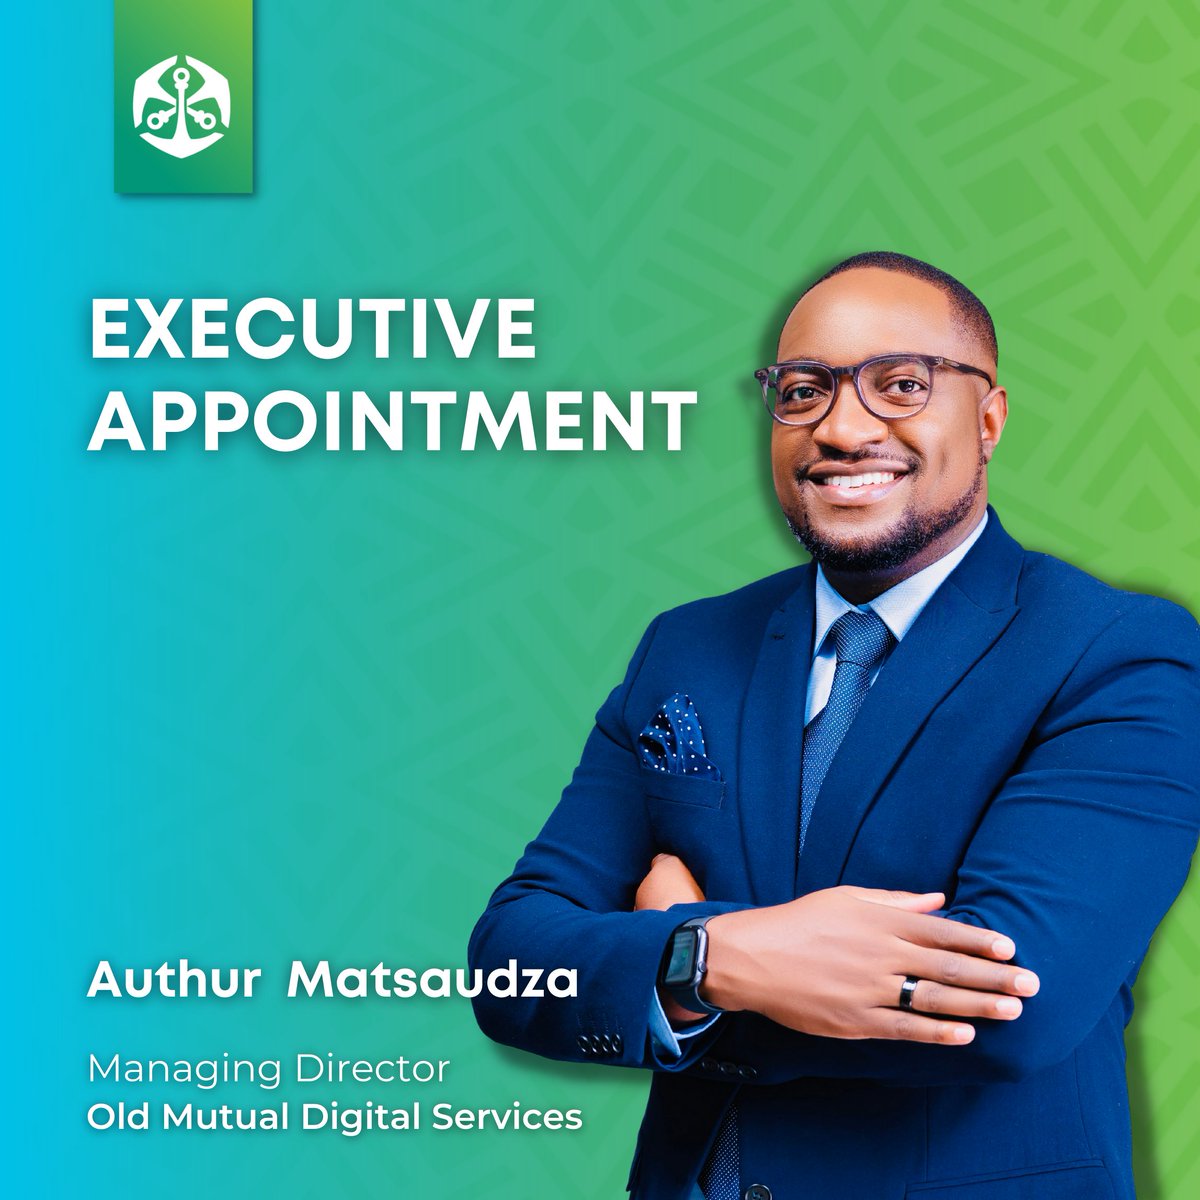 We are pleased to announce the appointment of Arthur Matsaudza as the Managing Director of Old Mutual Digital Services, the new fintech business under Old Mutual Zimbabwe Limited. Arthur brings strategic leadership and innovation expertise to the business unit. The Group would